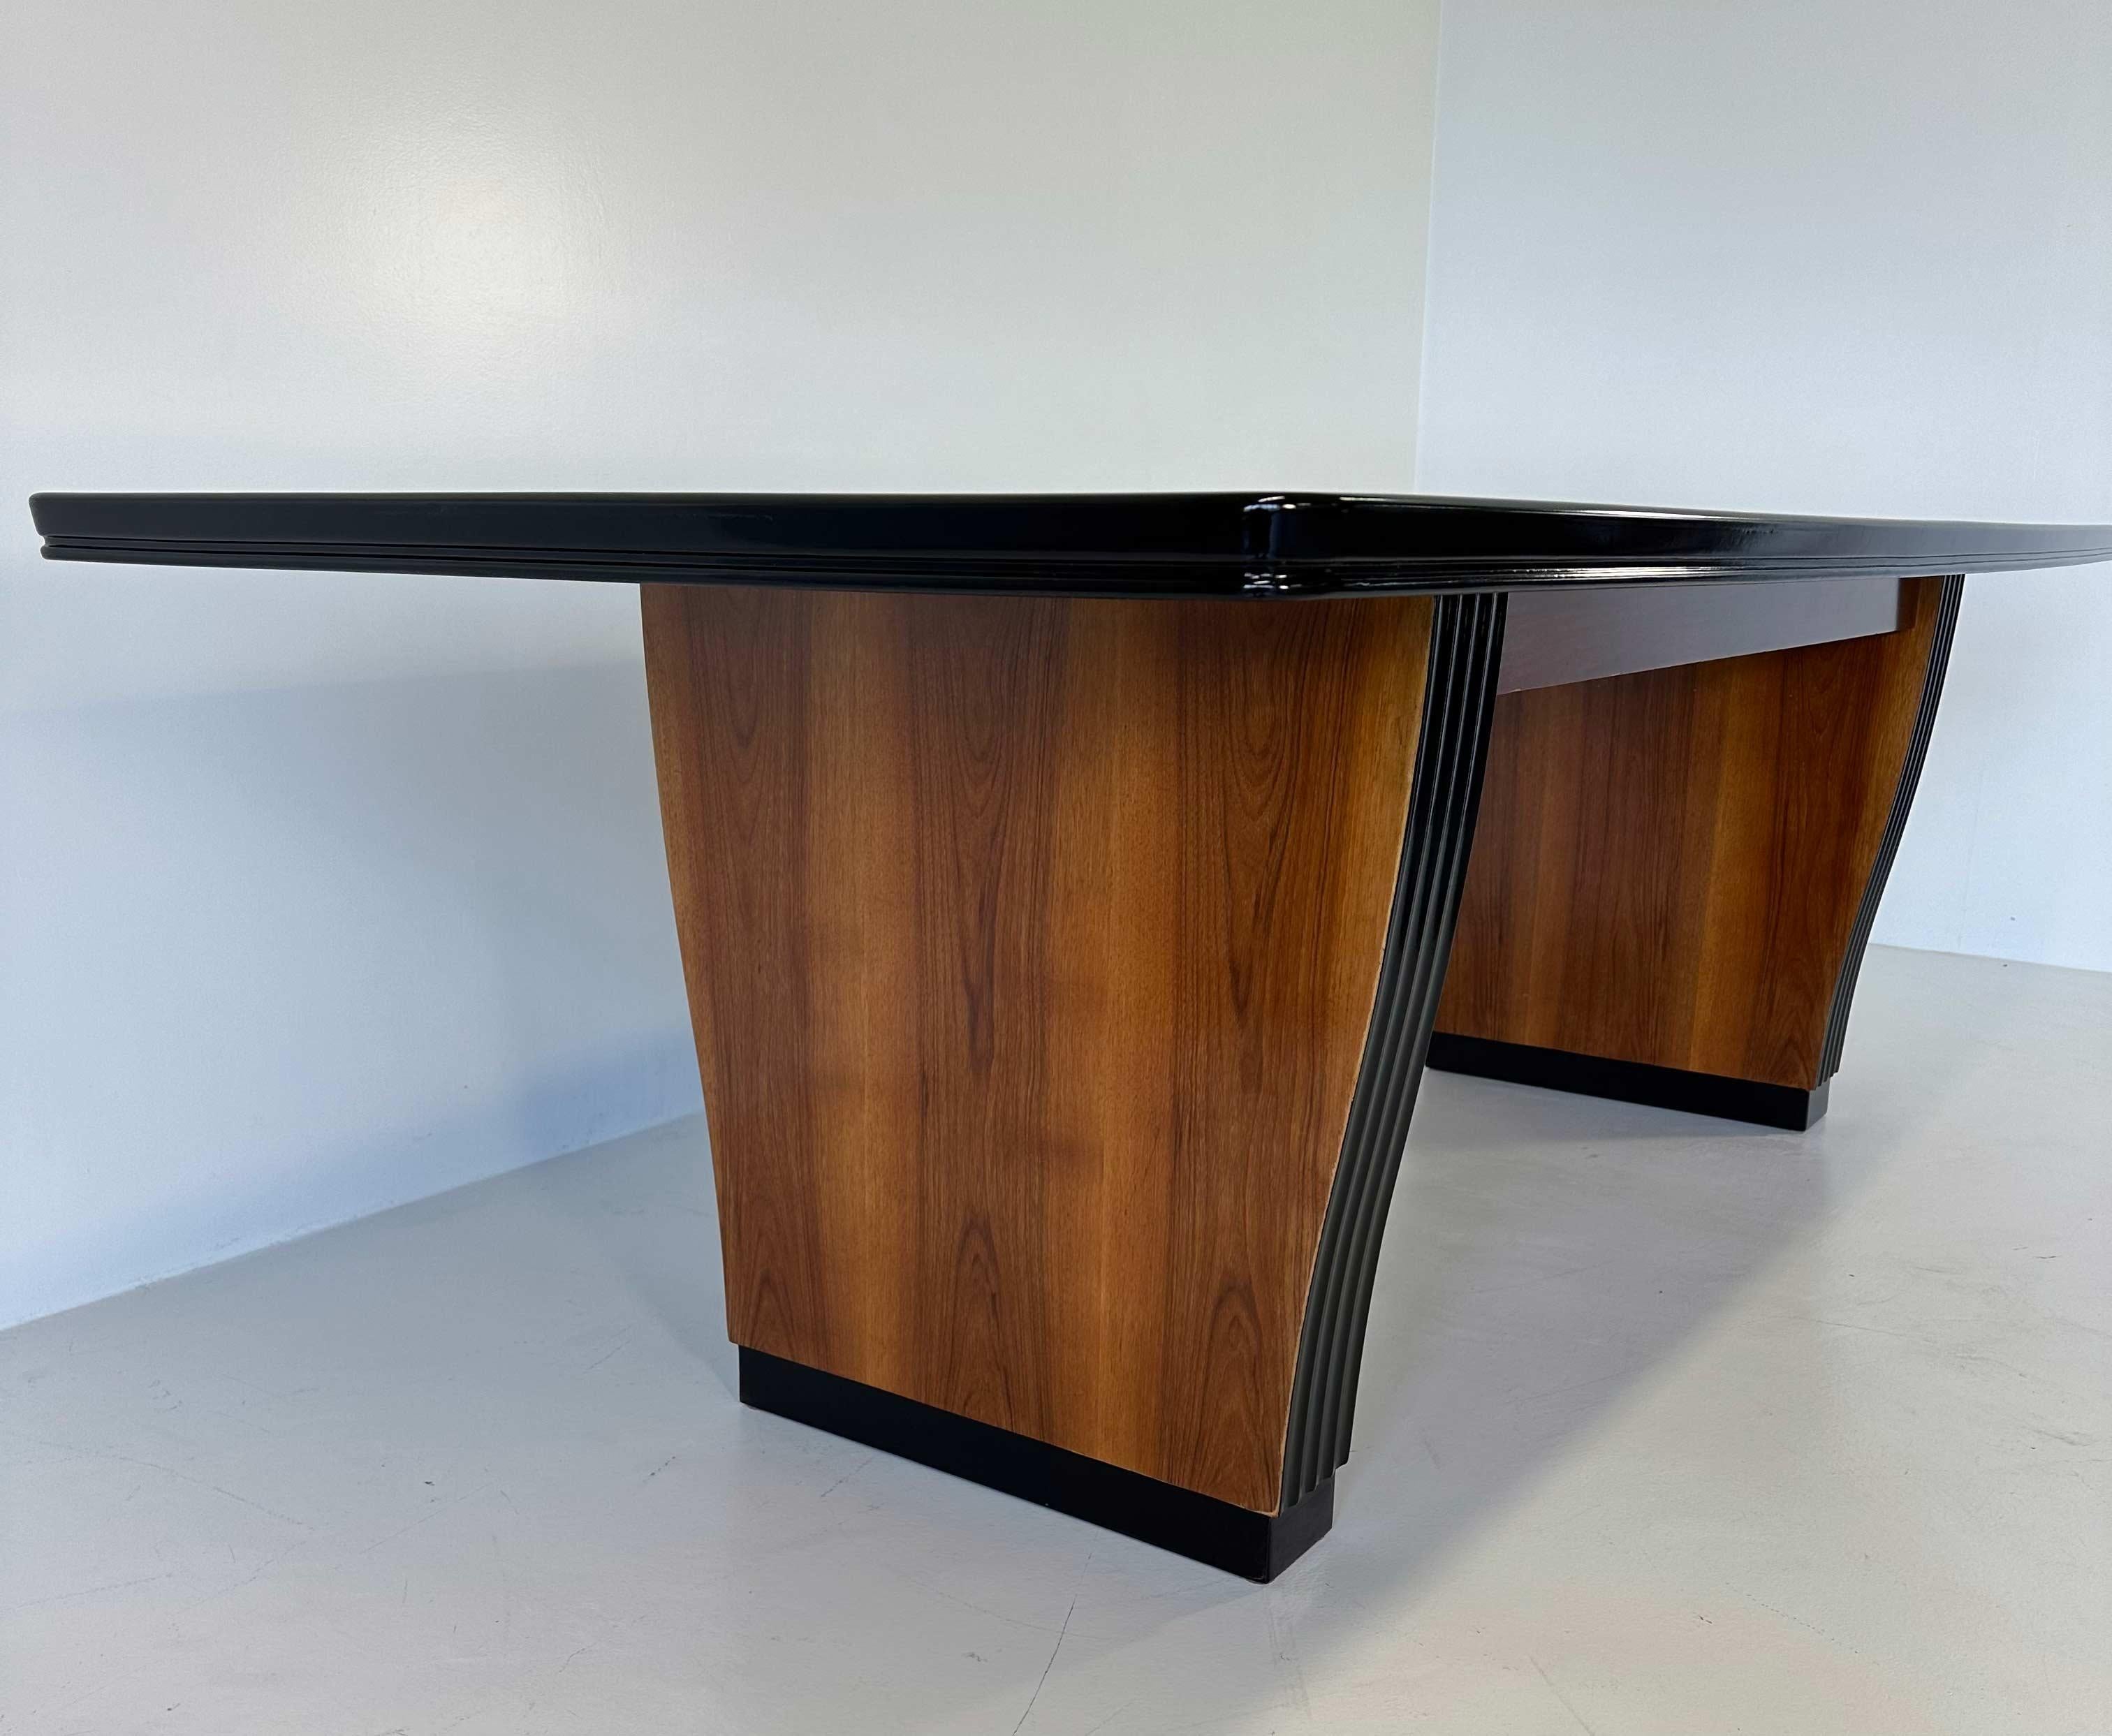 Italian Art Deco Walnut and Black Lacquer Table, 1930s For Sale 3